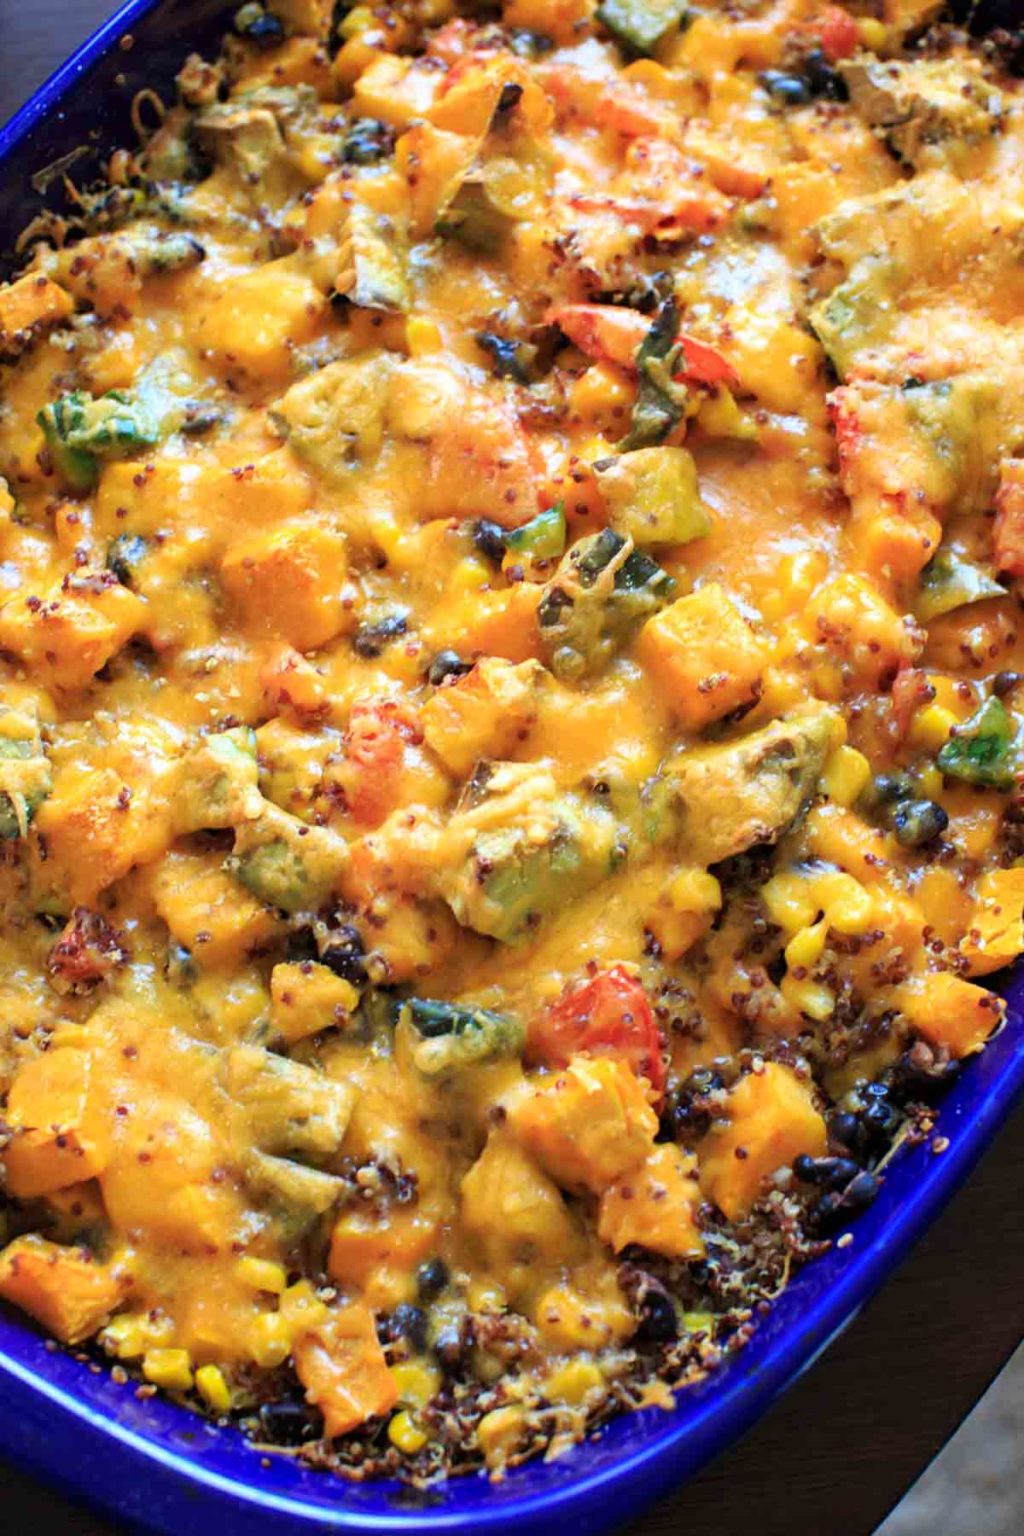 Butternut squash and other vegetables mixed together with quinoa  in casserole pan topped with cheese